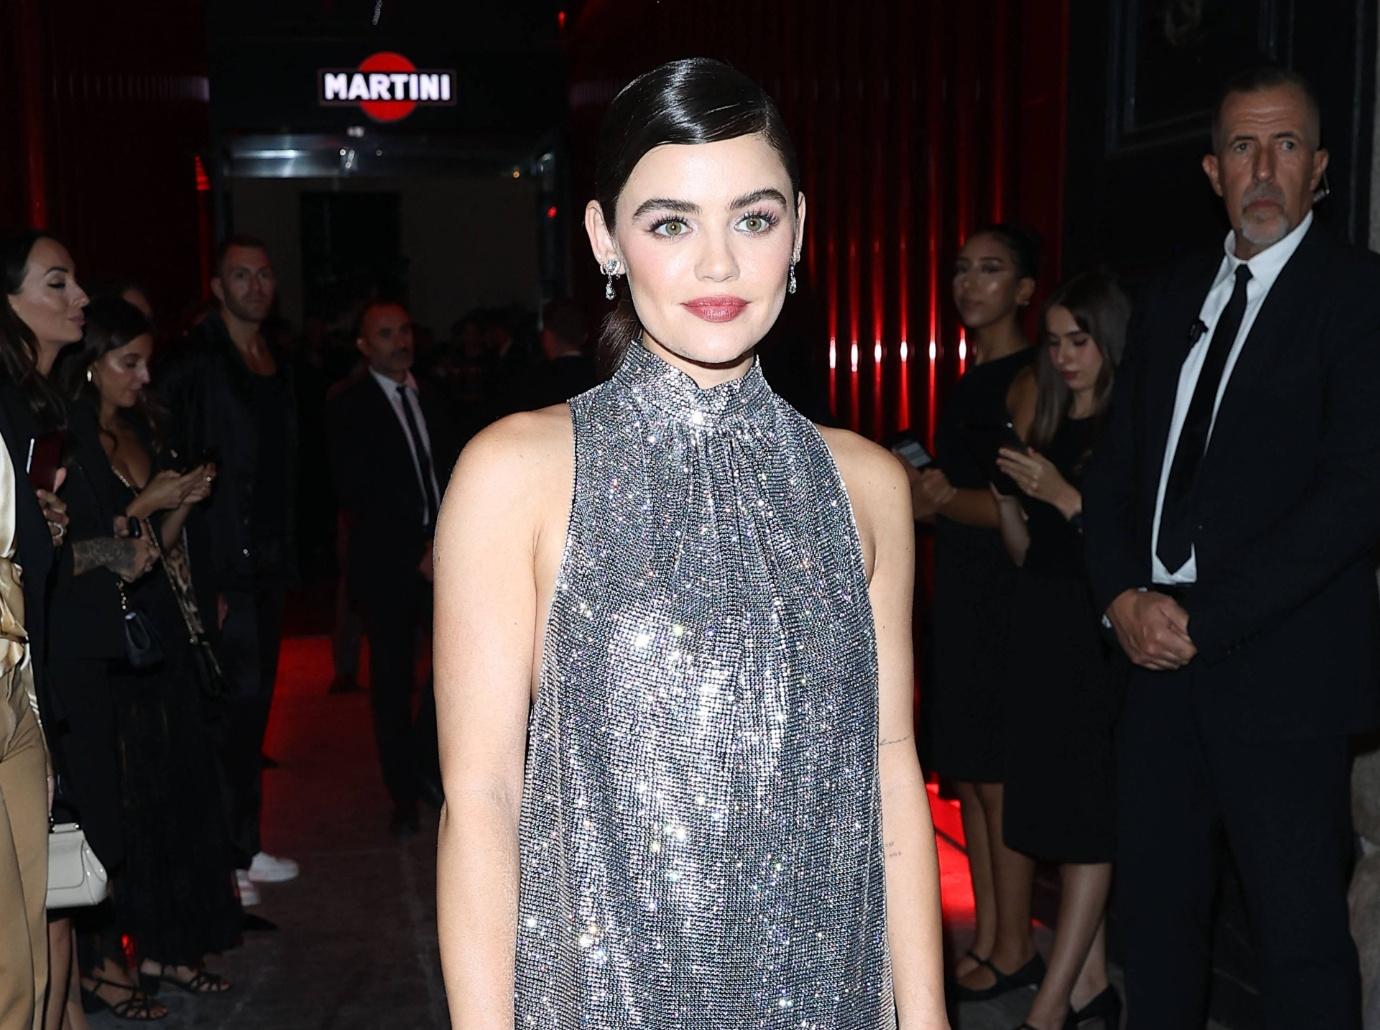 Lucy Hale 'Blacked Out' At Age 12 From Drinking, Went To Rehab At 23